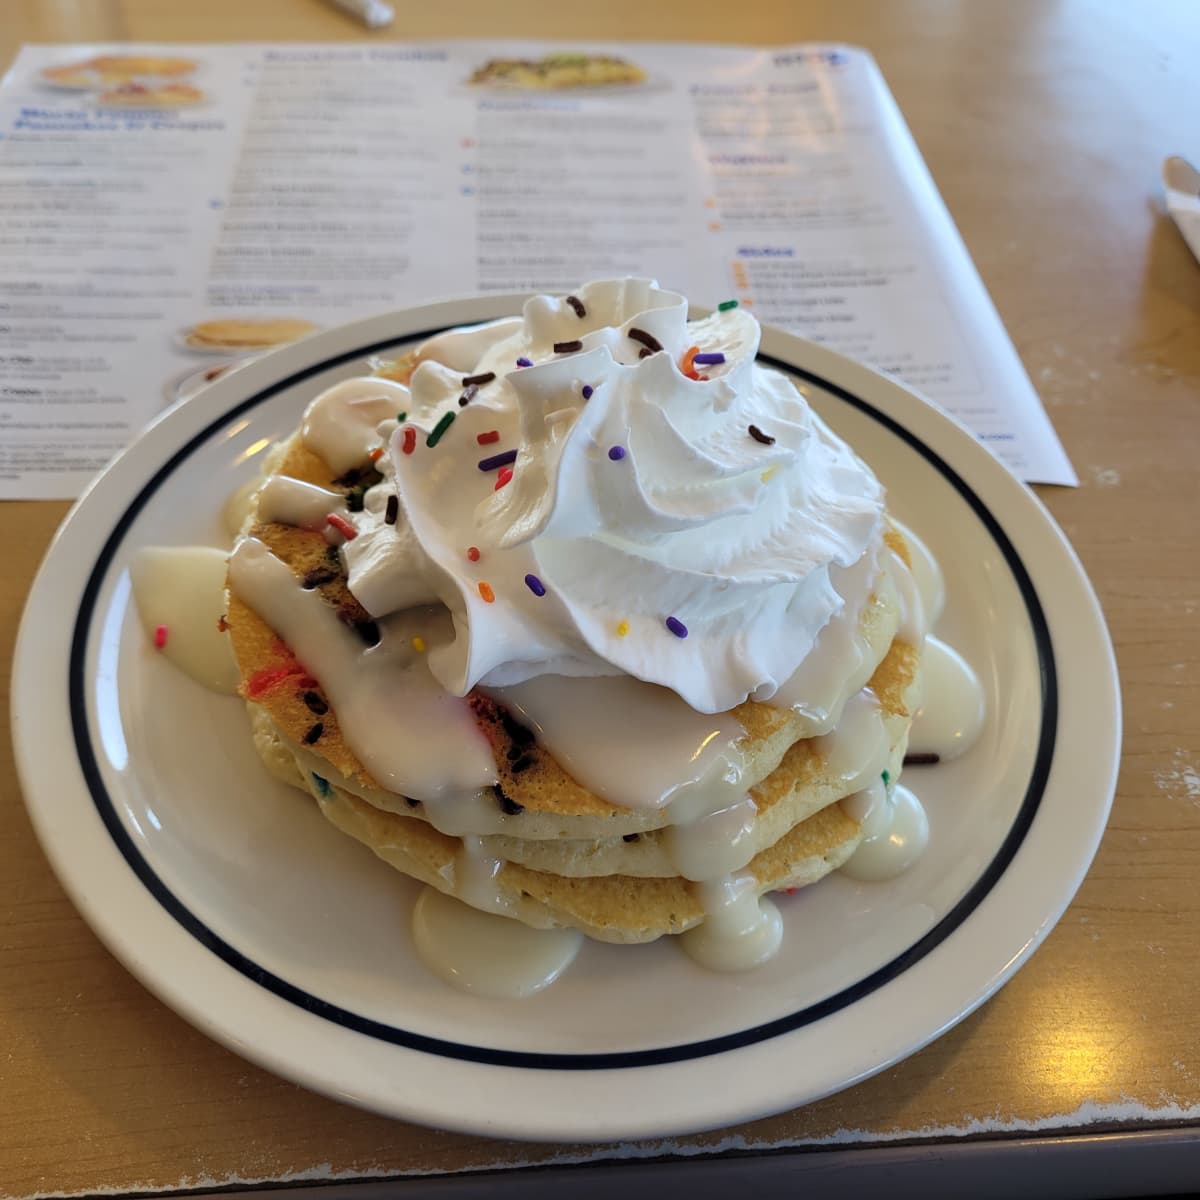 7 Reasons to Choose and Eat at IHOP - HubPages